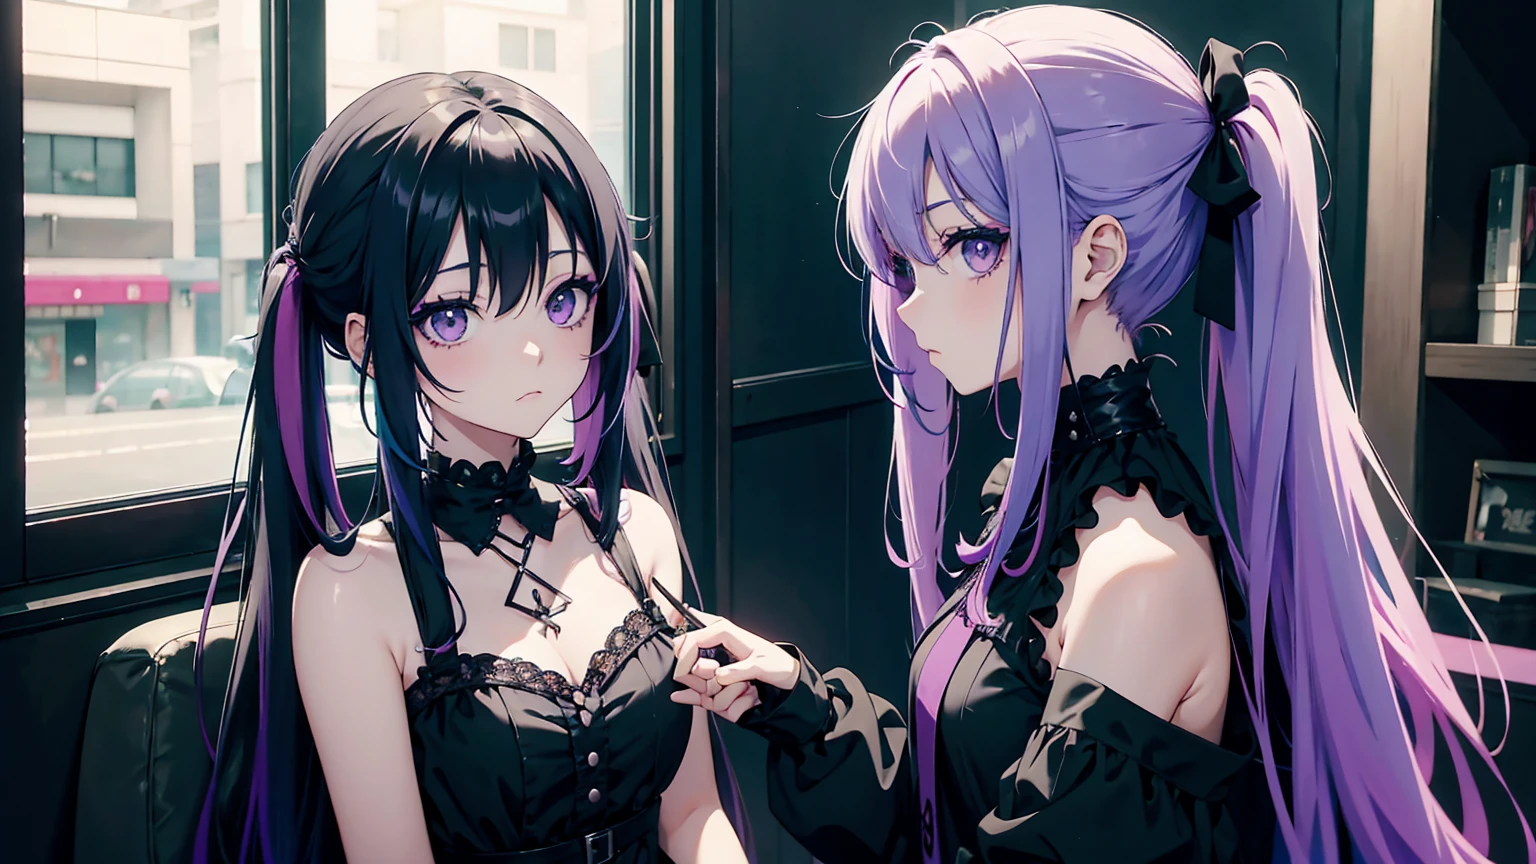 Arafed anime girl with green and purple hair sitting, pastel gothic, pastel goth aesthetic, pale goth beauty, 1 7 - year - old goth girl, goth girl aesthetic, goth girl, colores pastel oscuros, cabello pastel, loish |, Loish y Wlop, Desbordamiento pastel, gothic ambient, Una chica emo, Maquillaje Emo, coloured hair, far established shot, looking elsewhere